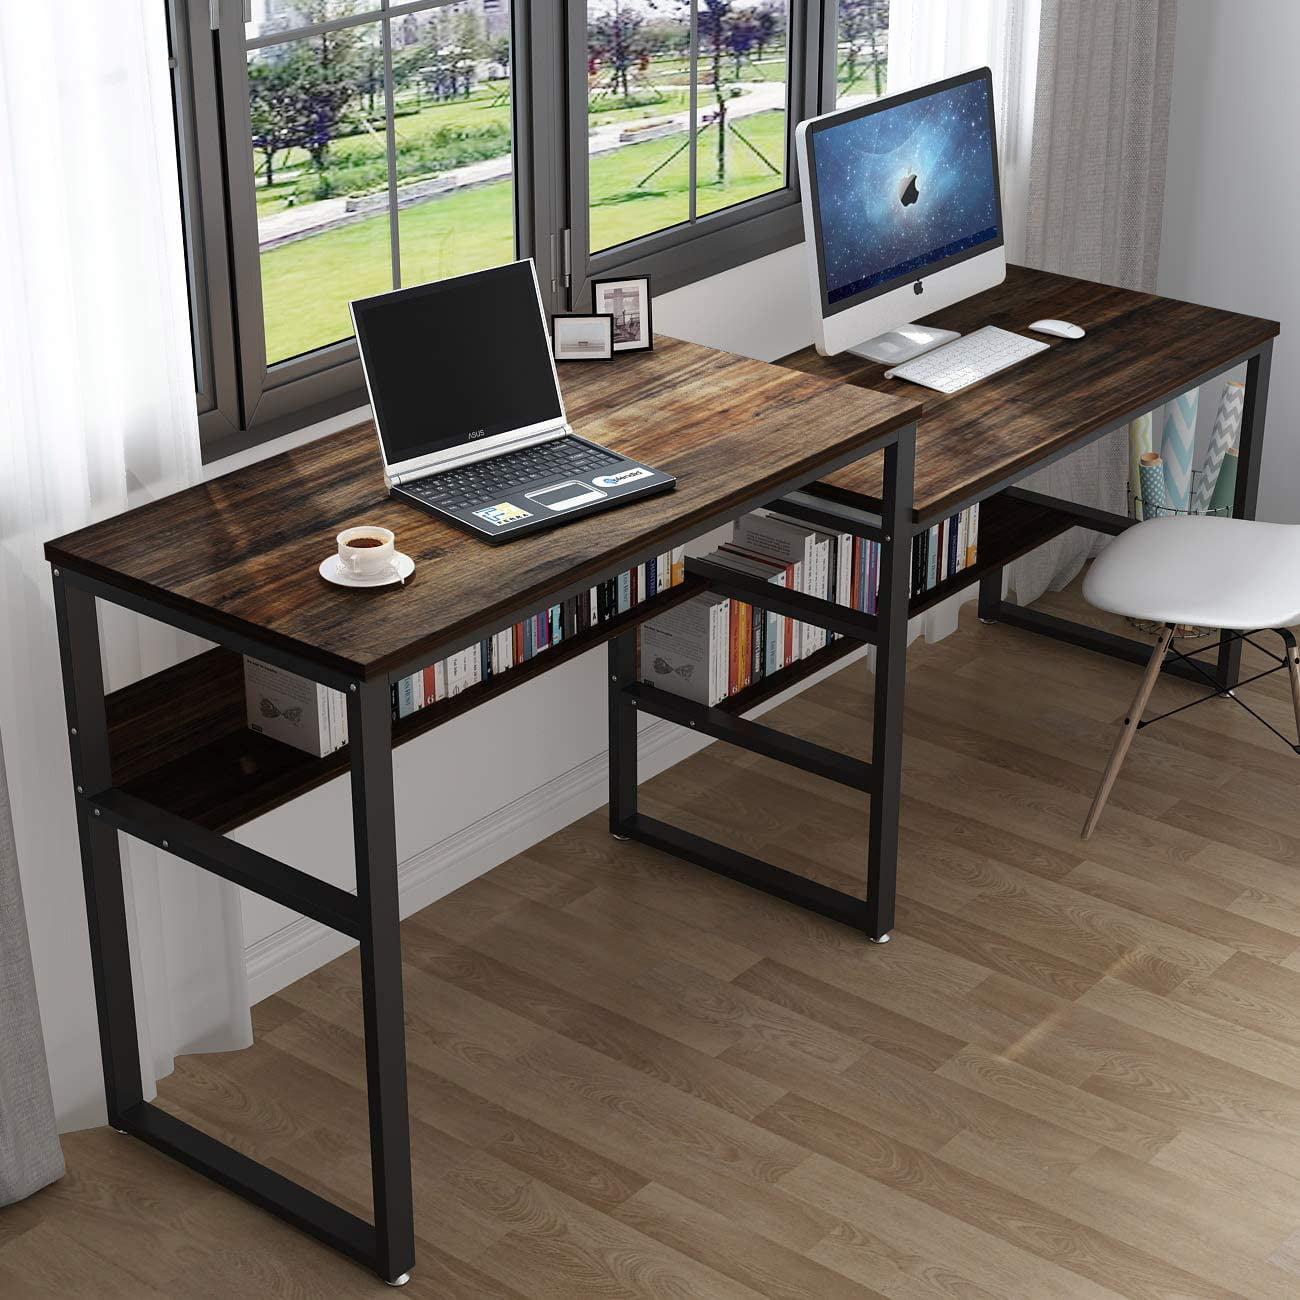 Tribesigns 94.48" Rustic Two Person Desk Double Computer Desk~ Home Office US